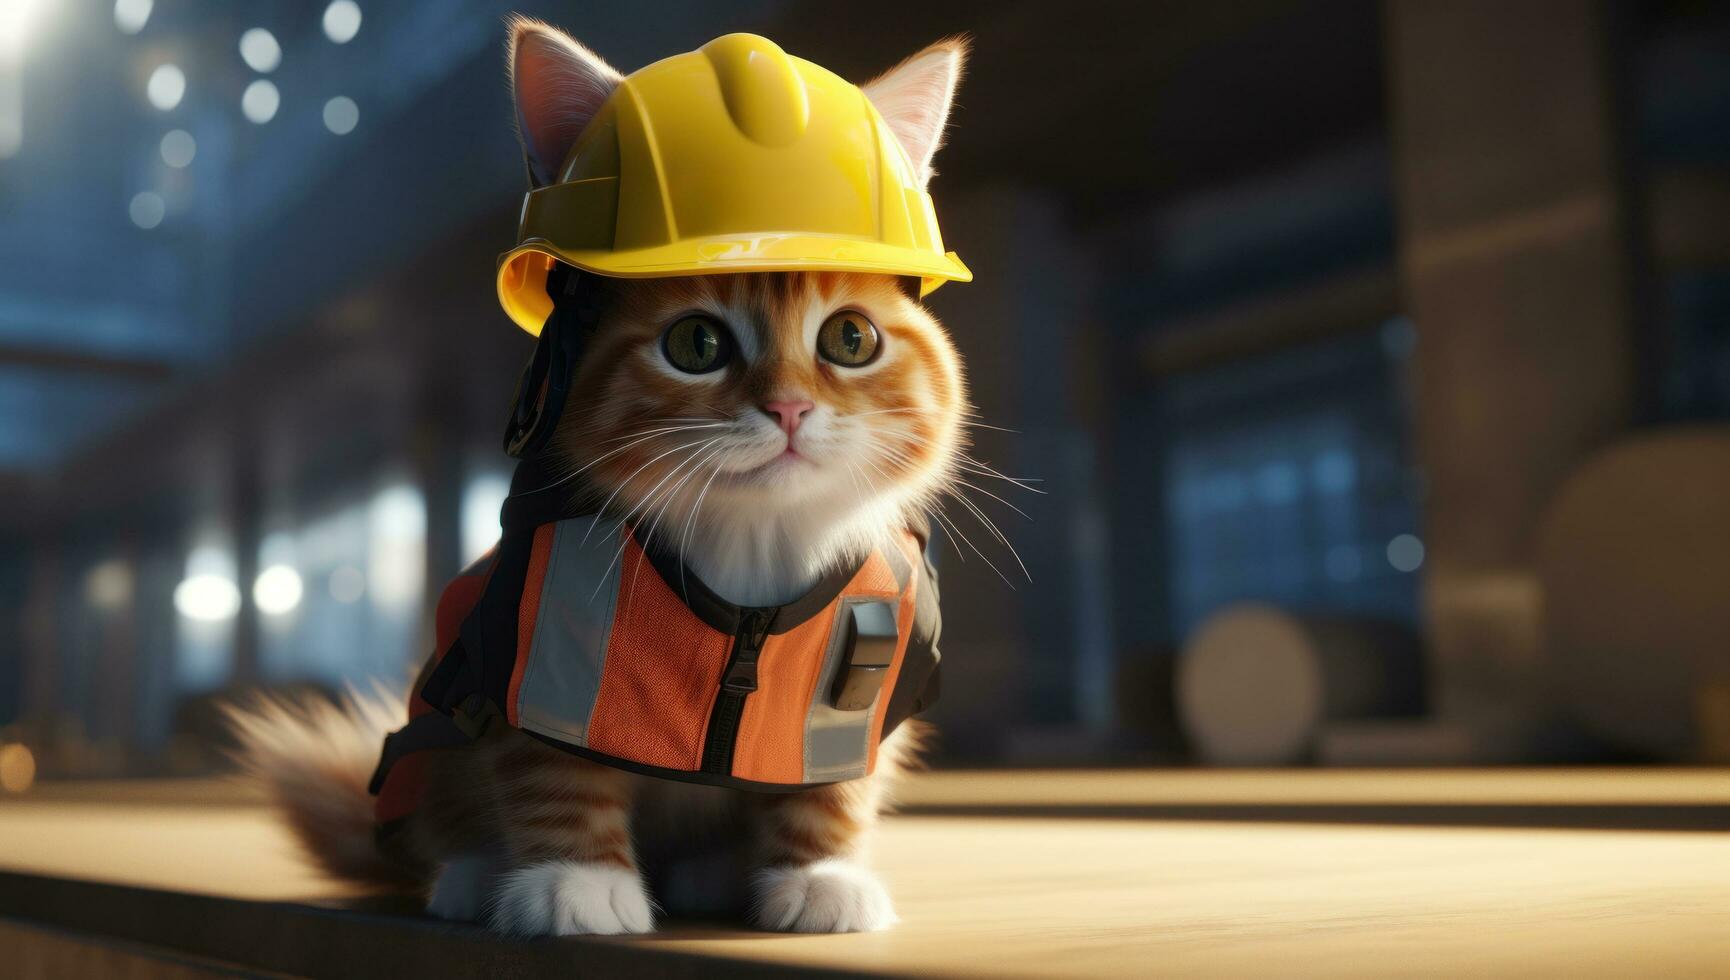 AI generated a cat wearing an orange and yellow hard hat photo